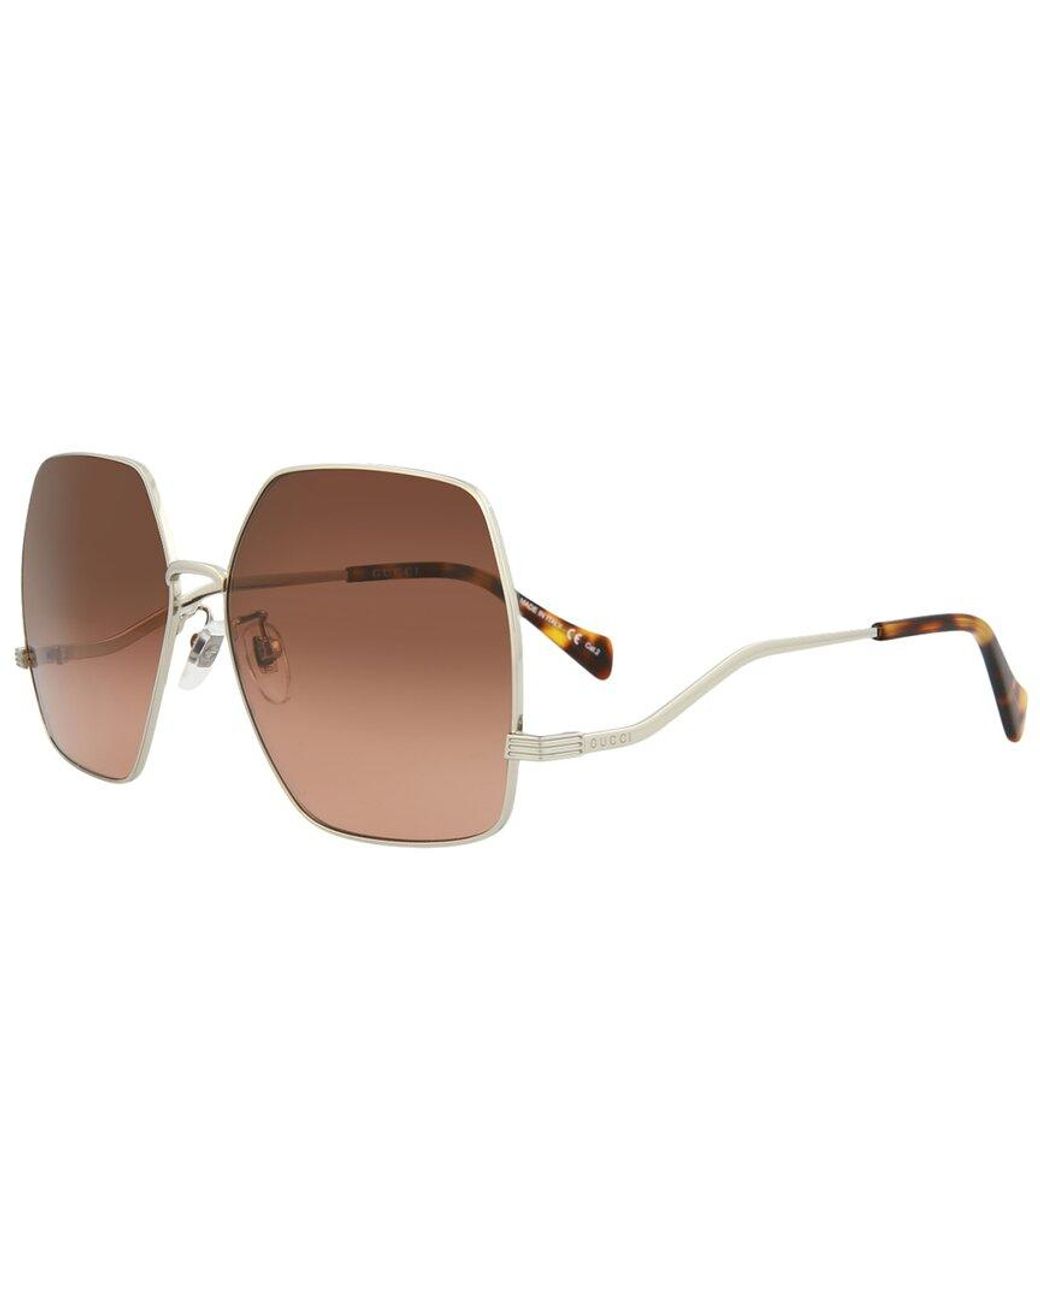 Gucci GG1005S 61mm Sunglasses in Brown | Lyst